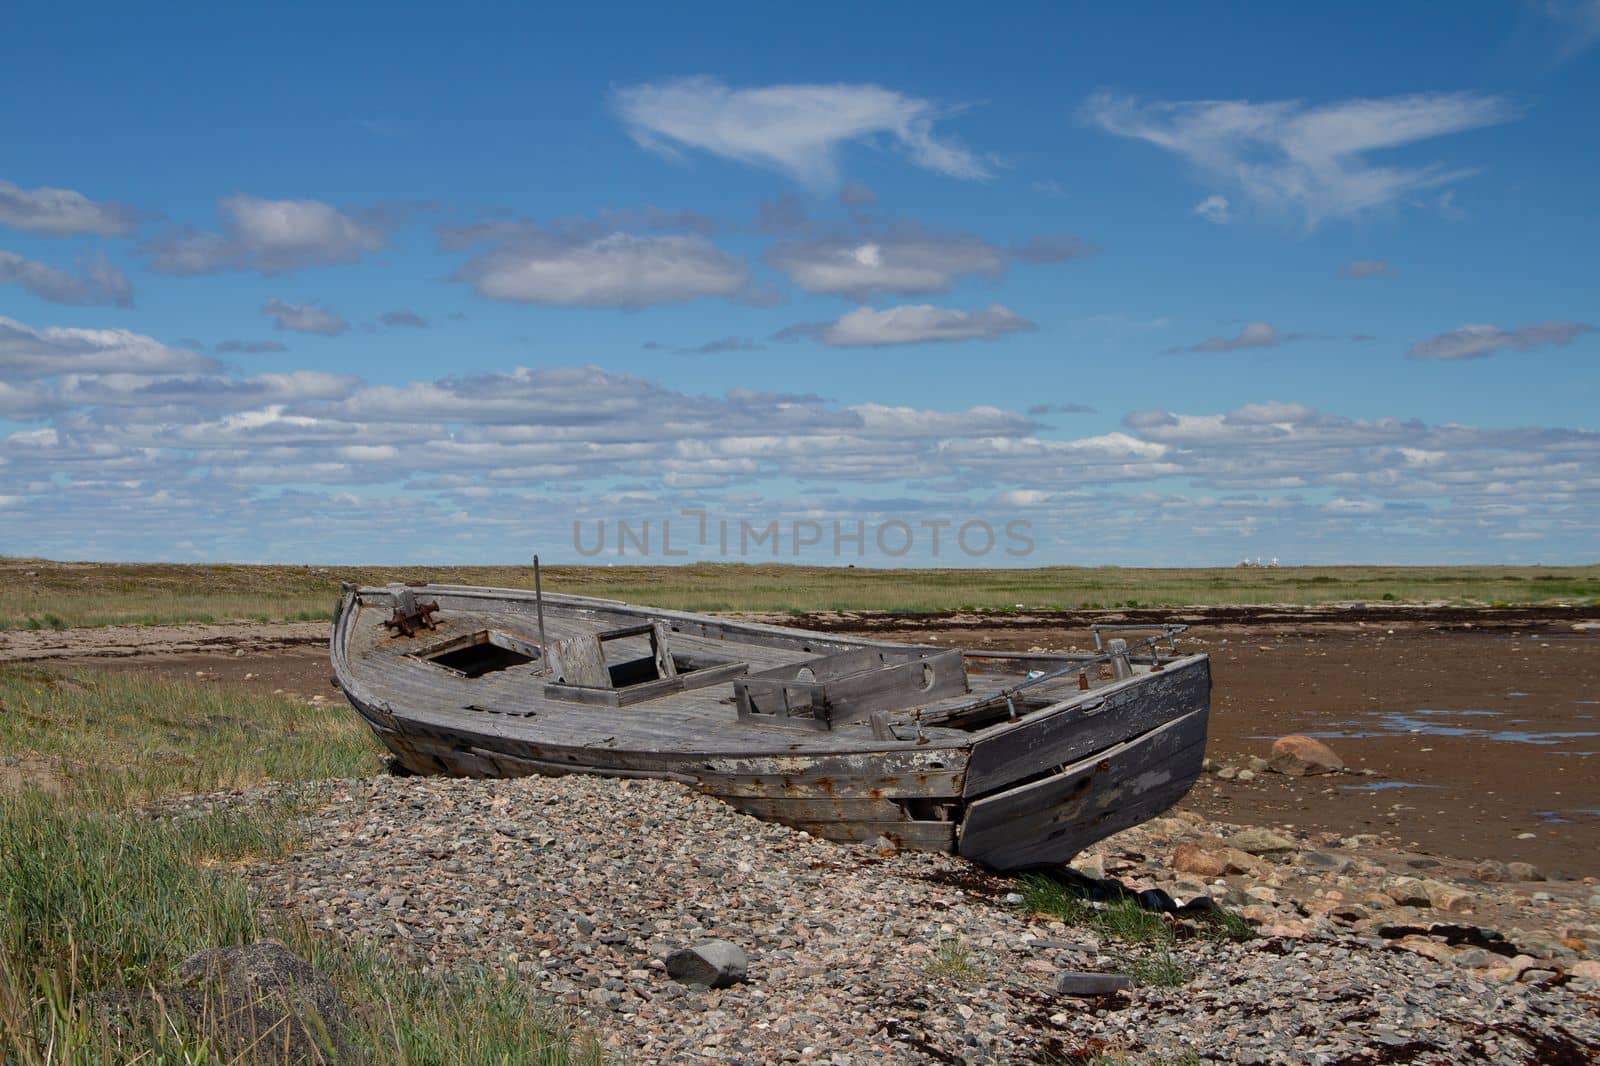 Side view of old wooden boat wrecked and stranded on a rocky shoreline, north of Arviat, Nunavut, Canada